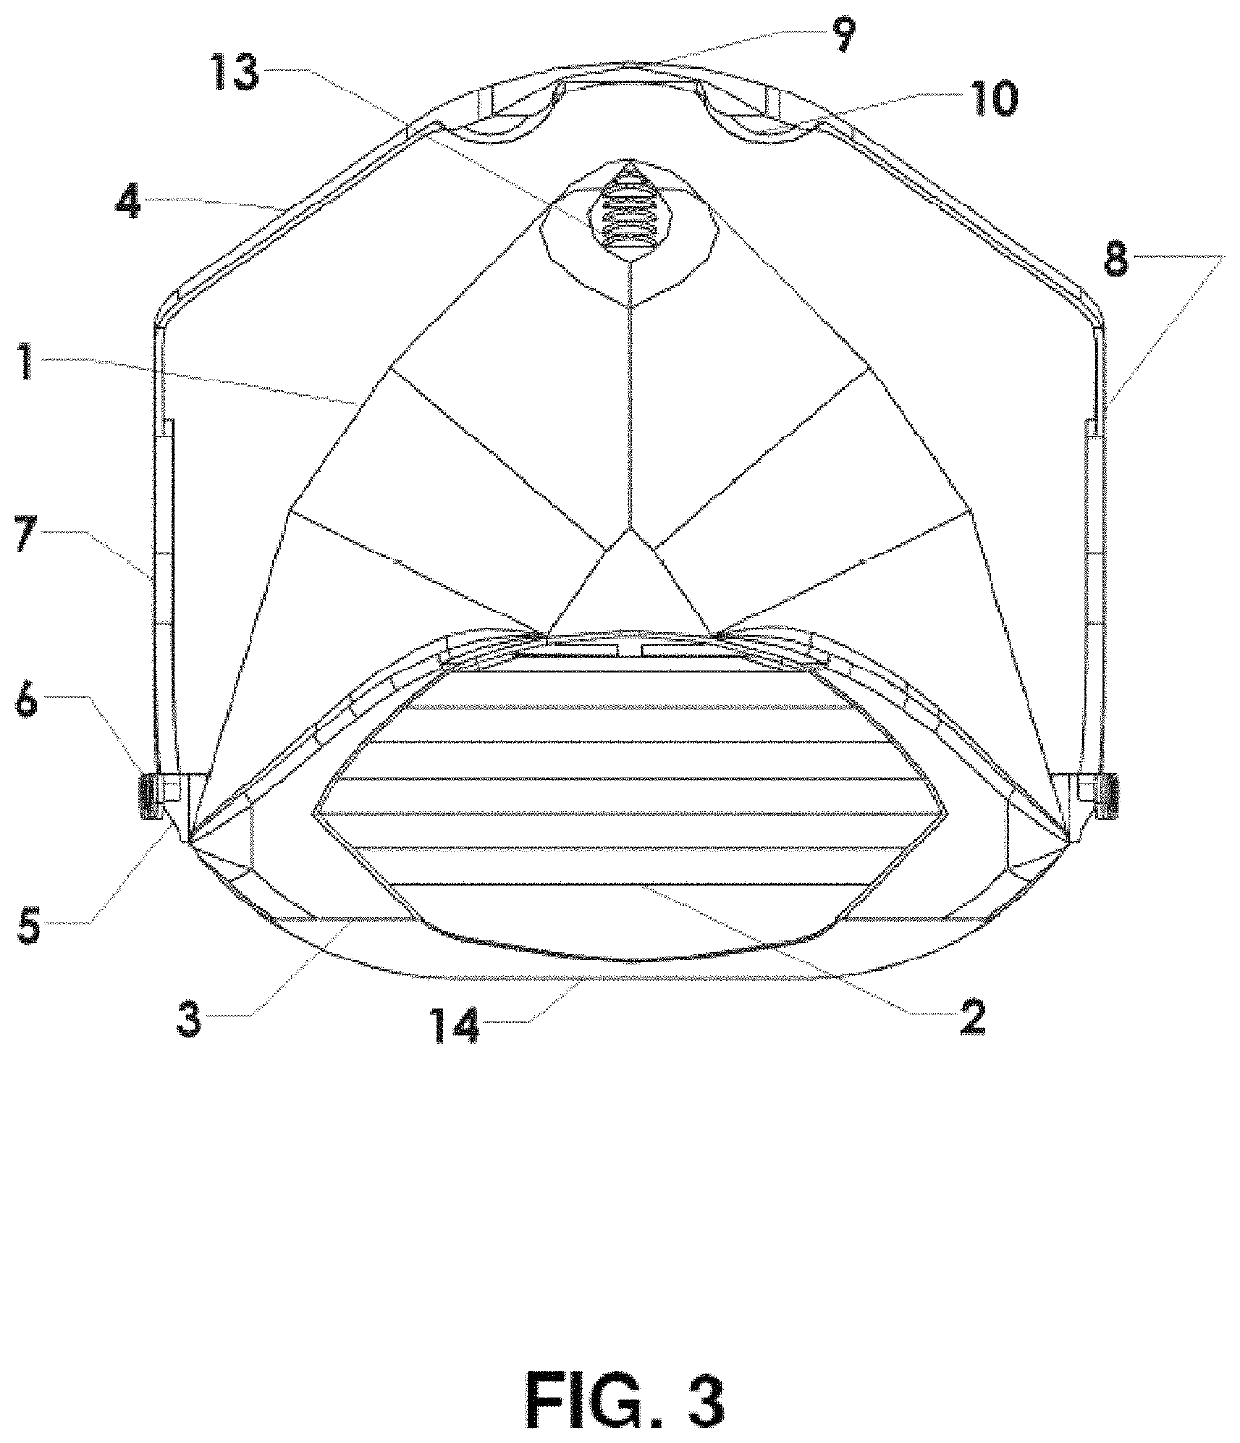 Facemask with filter insert for protection against airborne pathogens